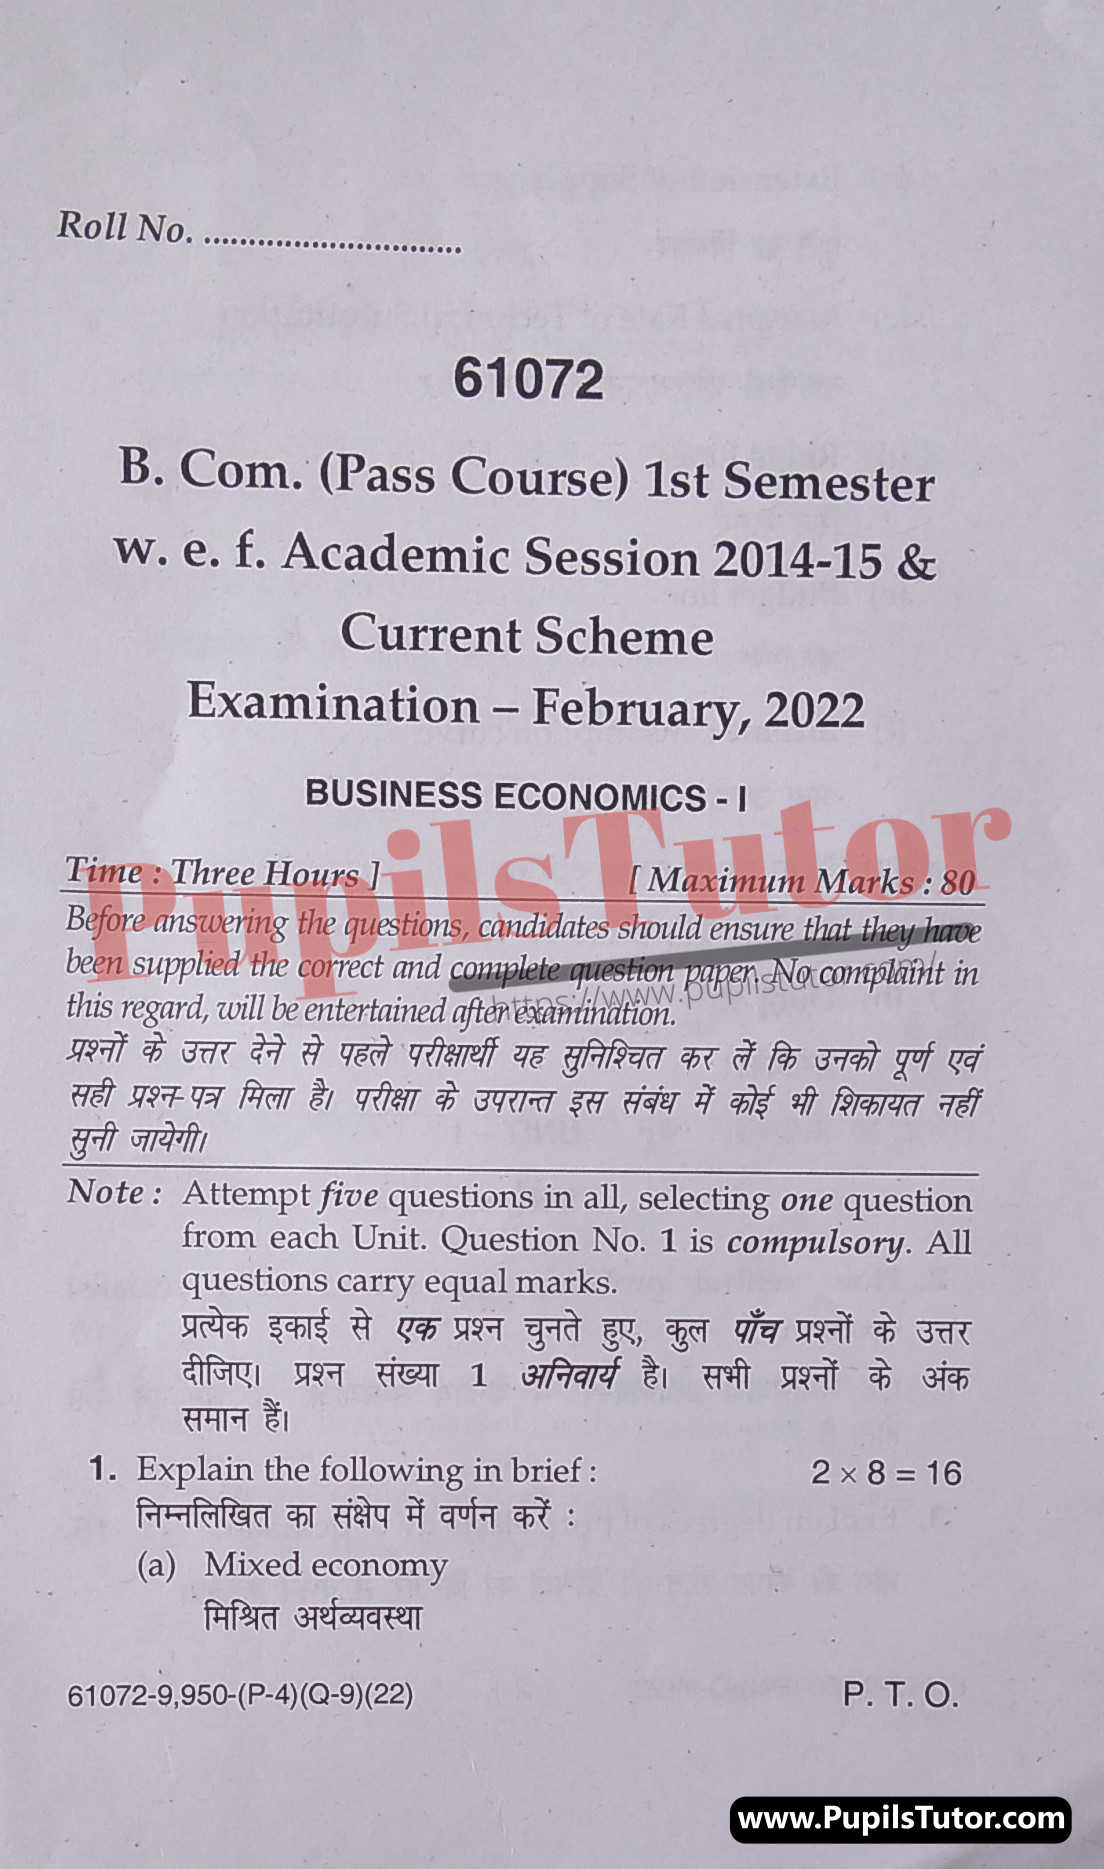 MDU (Maharshi Dayanand University, Rohtak Haryana) Bcom Pass Course First Semester Previous Year Business Economics Question Paper For February, 2022 Exam (Question Paper Page 1) - pupilstutor.com